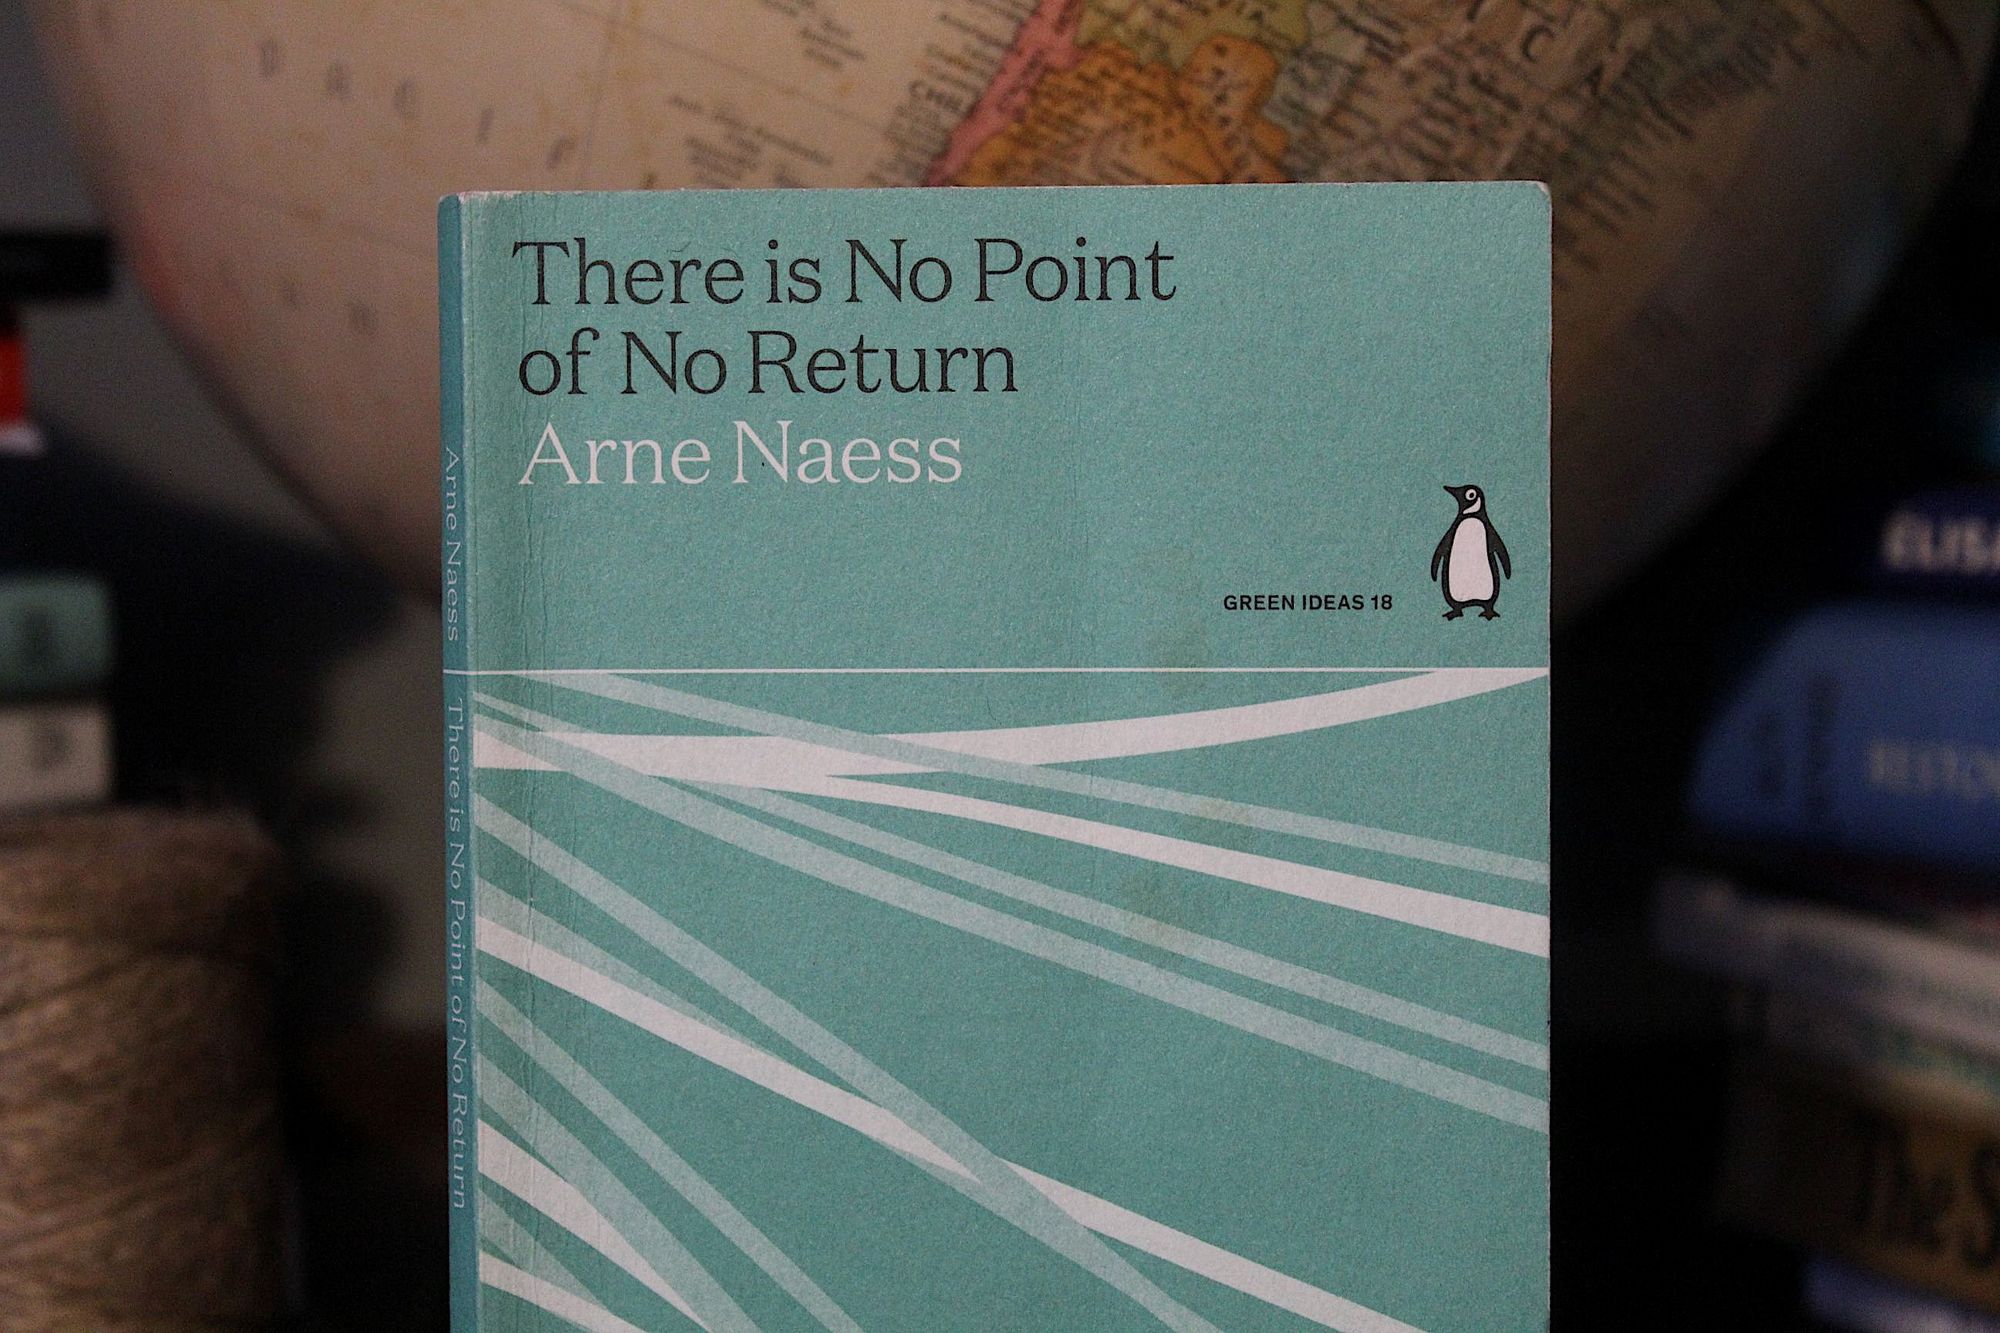 A book portrait of There is No Point of No Return by Arne Næss